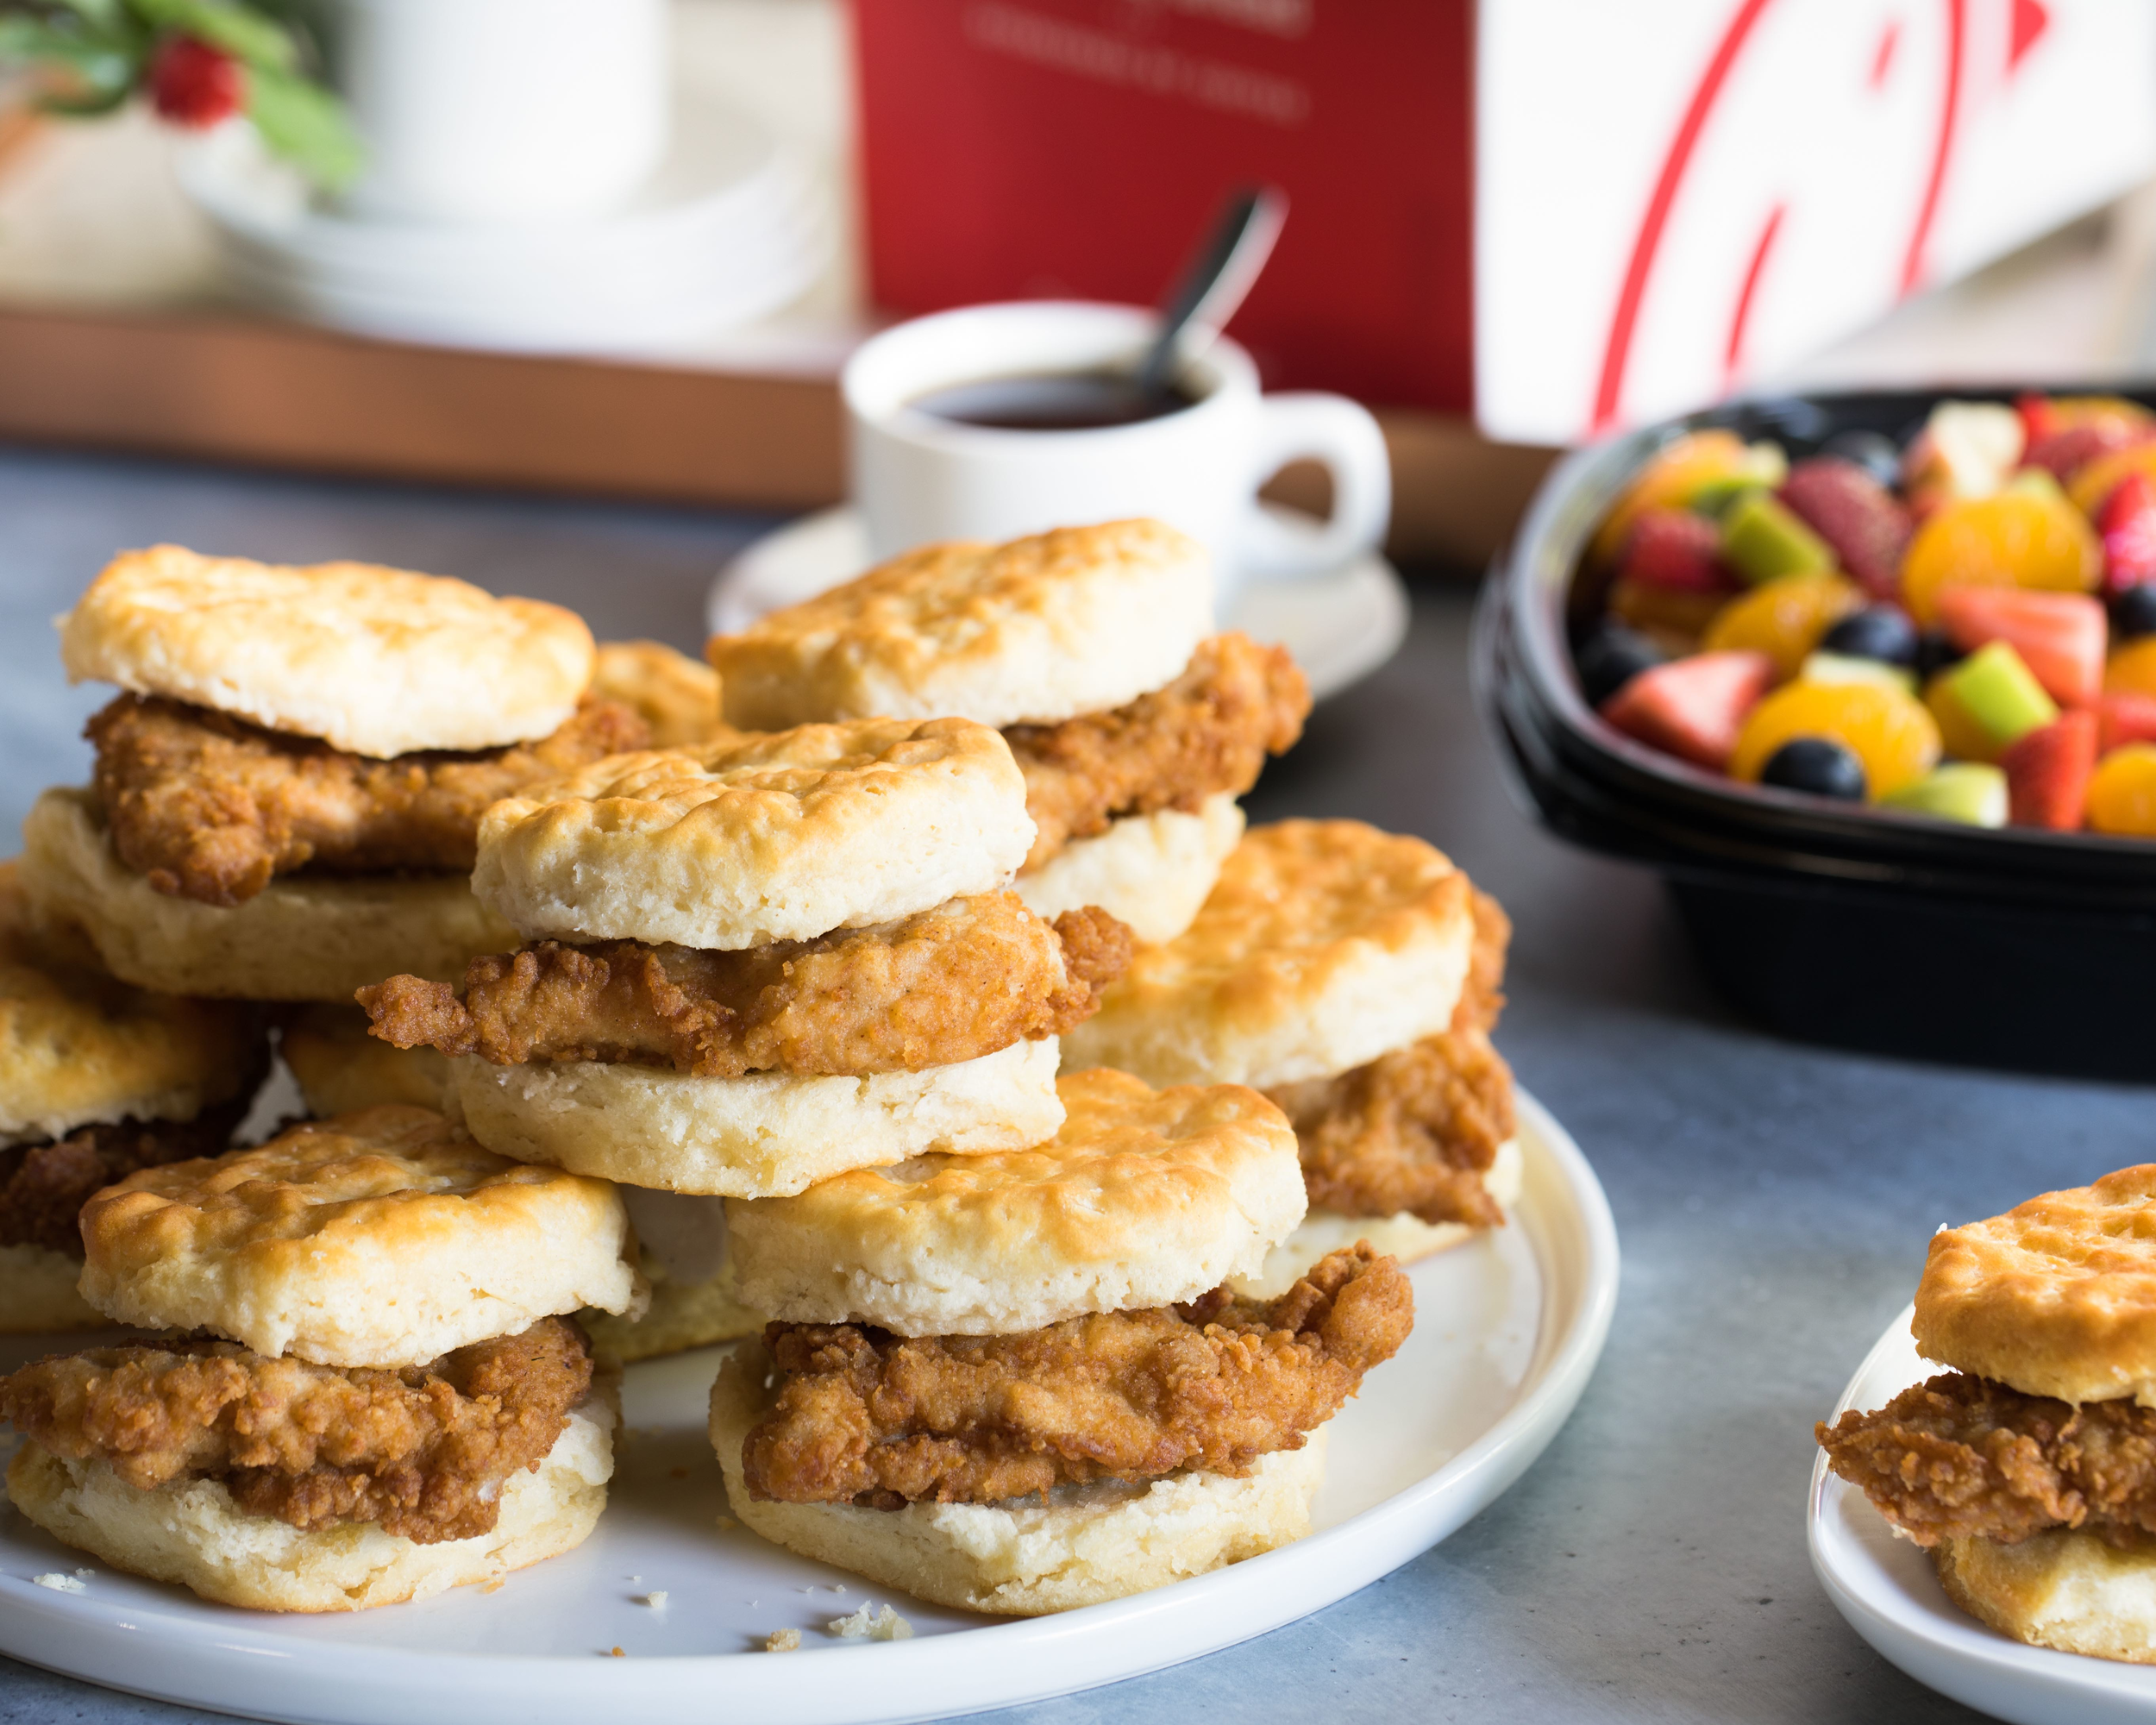 Chick-fil-A Chicken Biscuits on a plate with fruit and coffee.